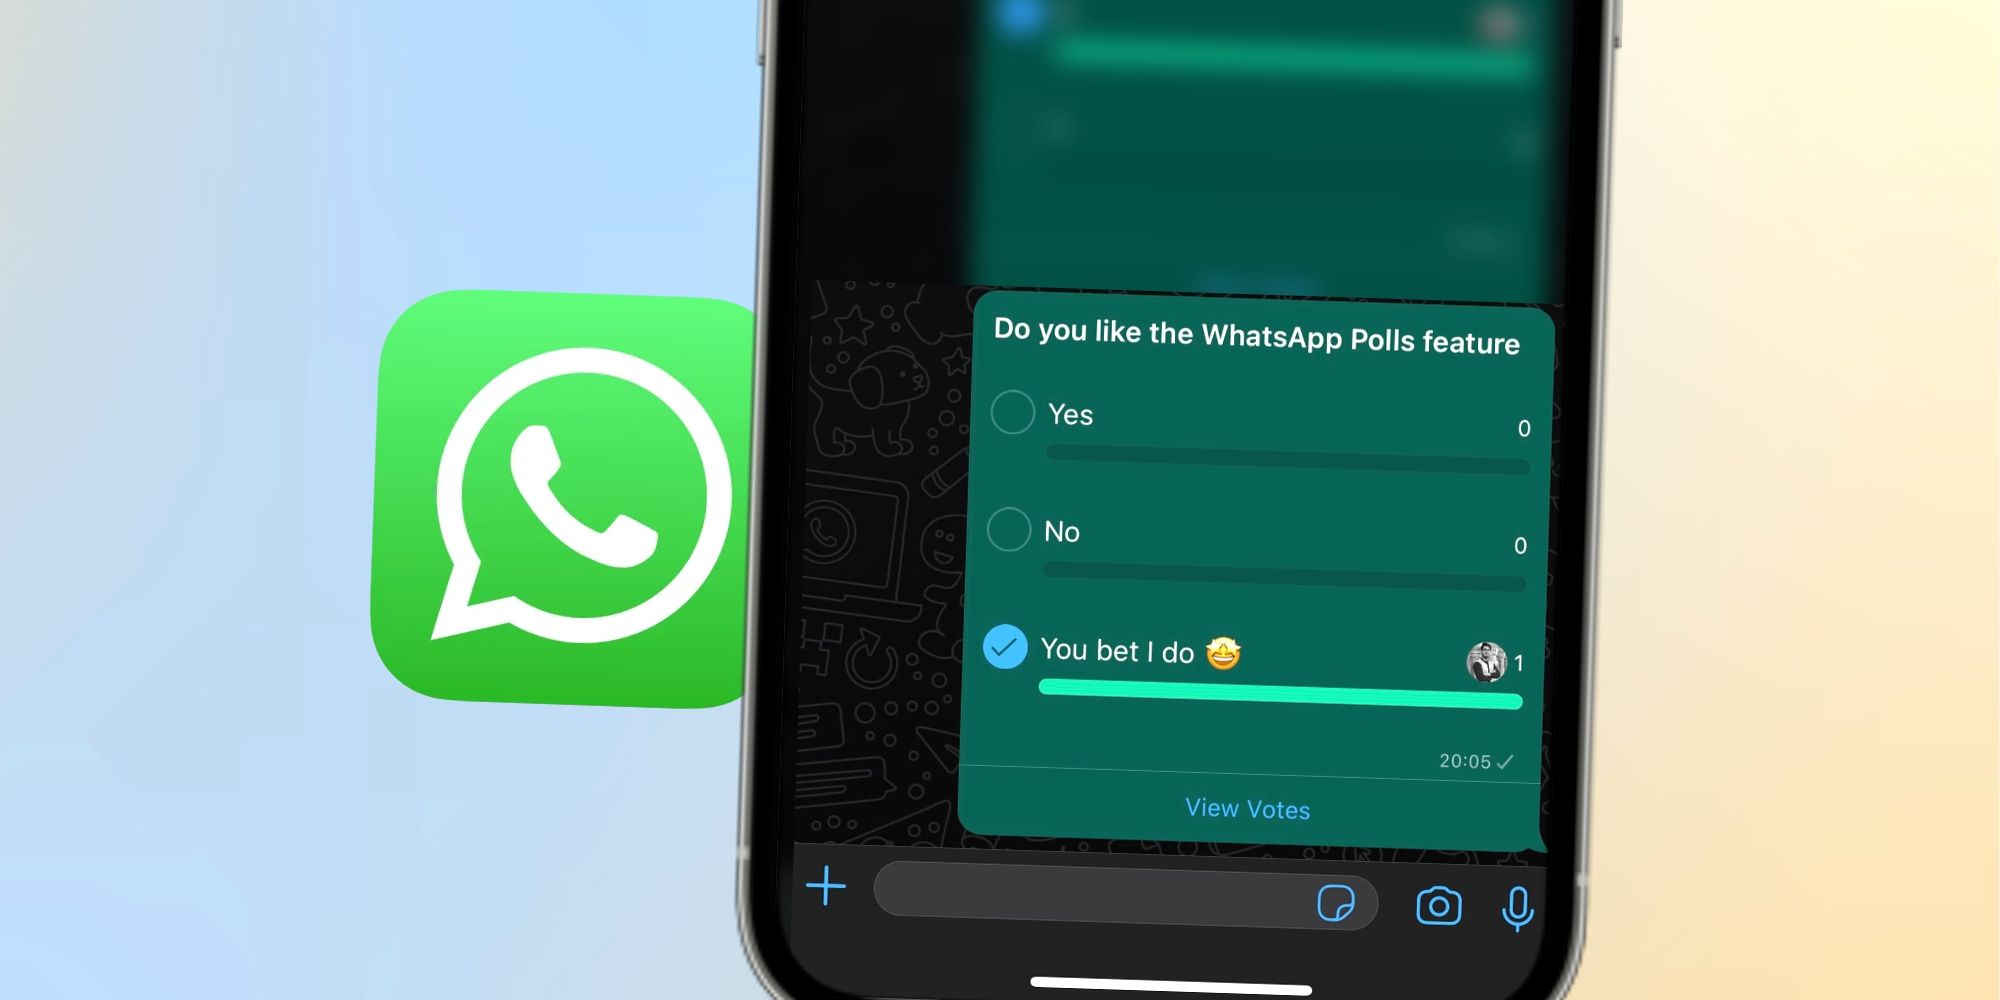 Screenshot of the WhatsApp Polls feature along with the app's logo on a colorful background